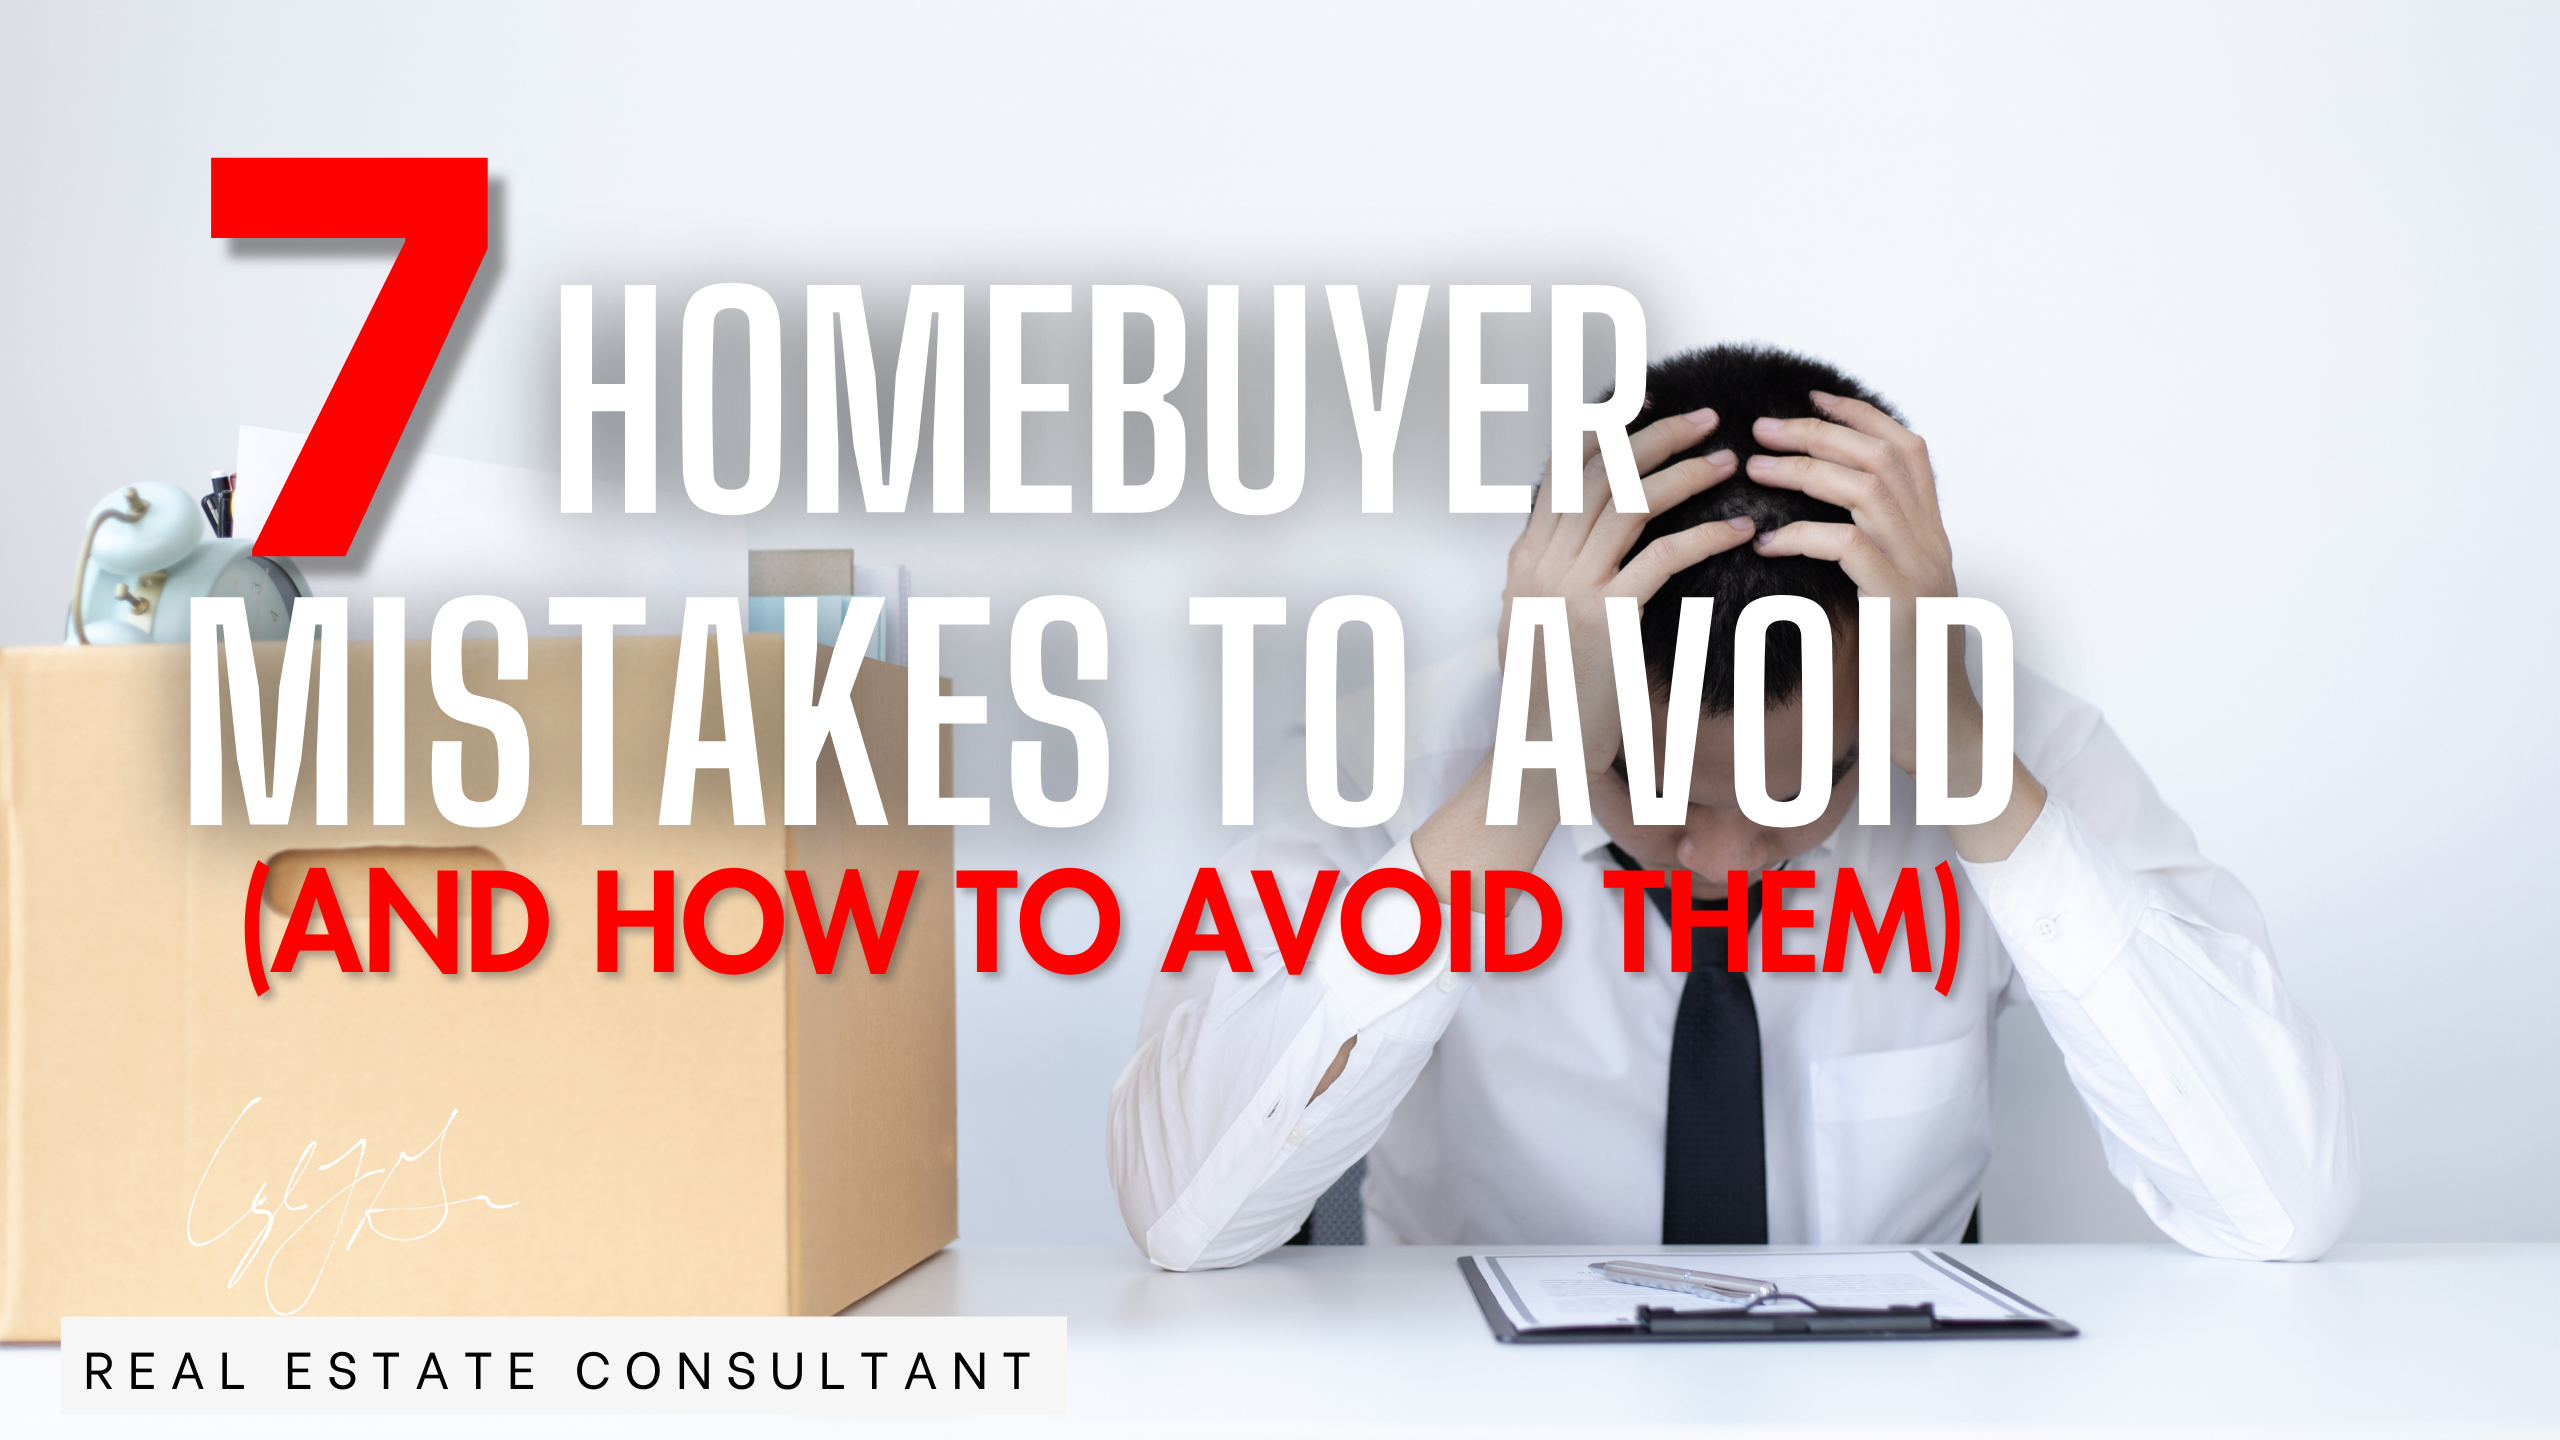 7 homebuyer mistakes and how to avoid them